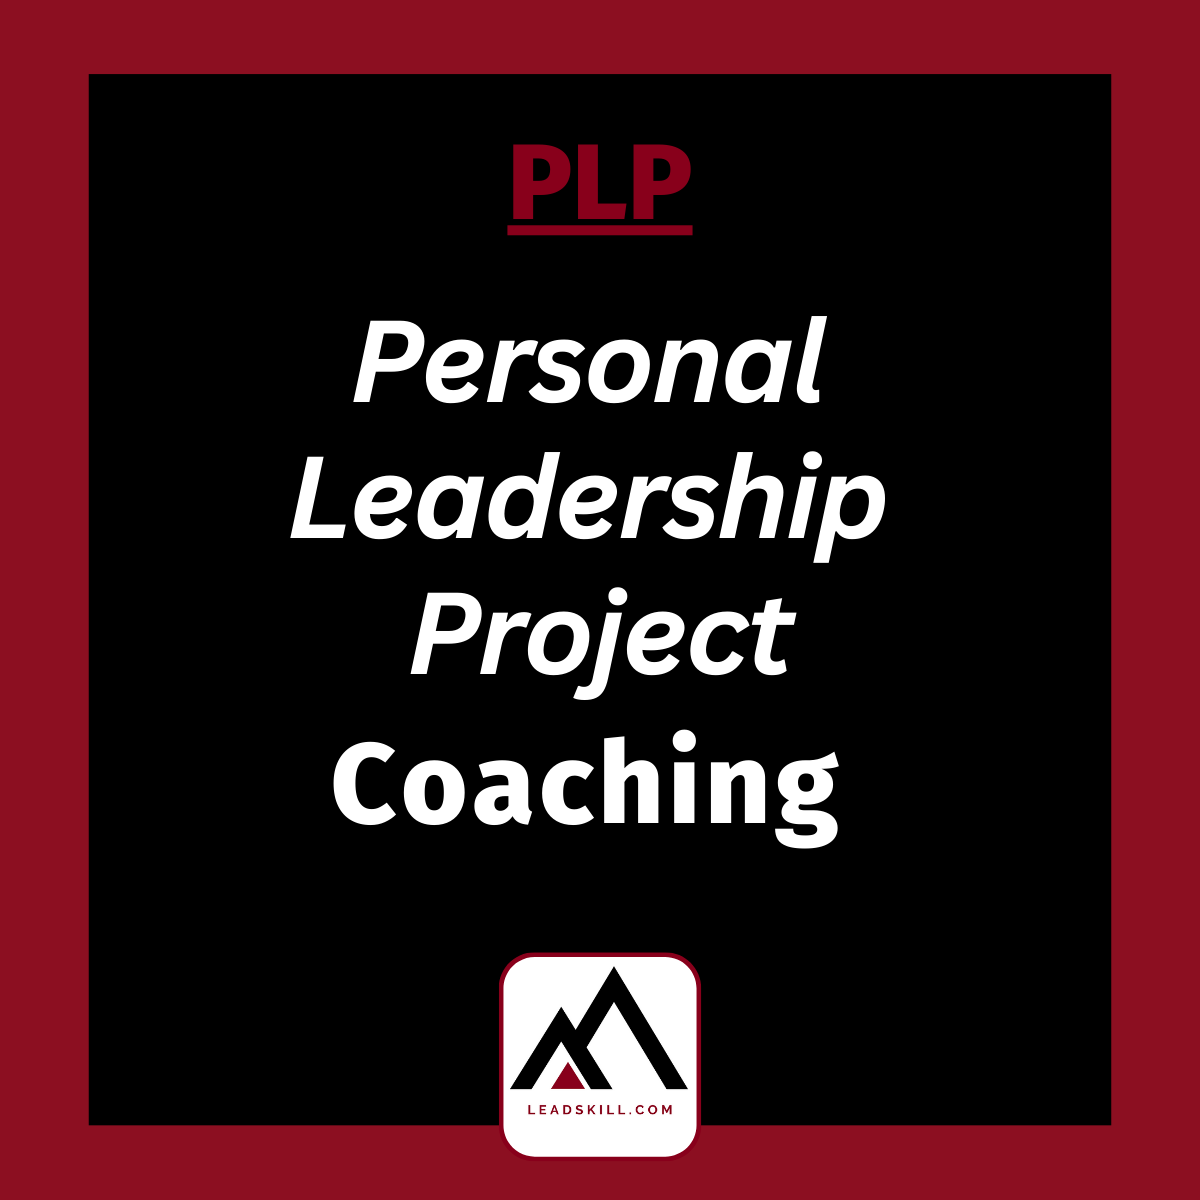 Personal Leadership Project Coaching in white letters on a black background with icon of Leadskill and a burgundy colored border